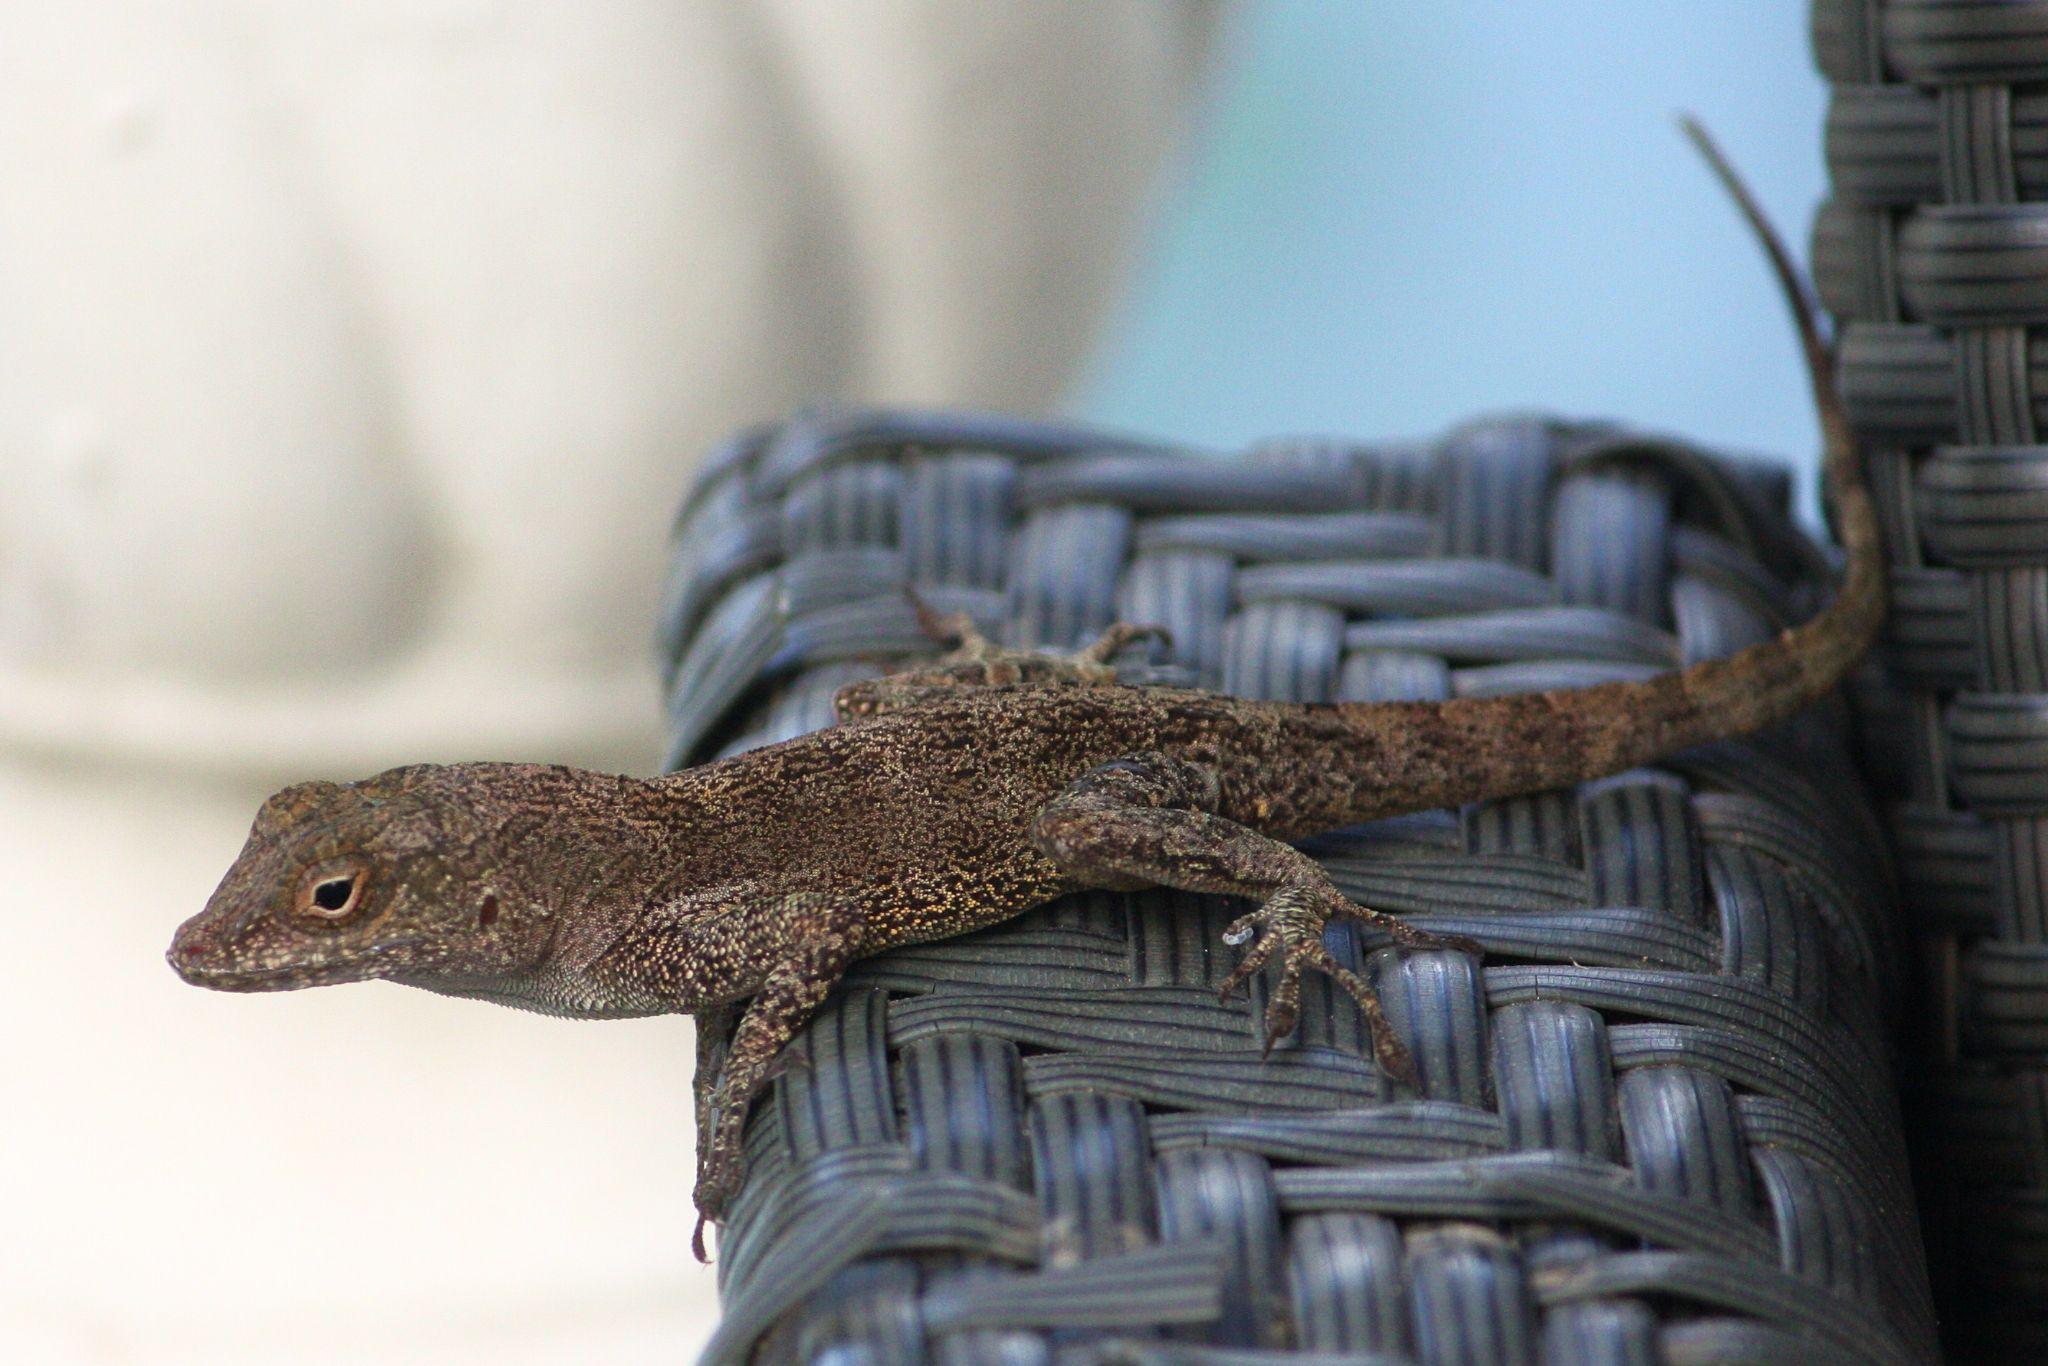 Side view of a brown speckled lizard laying on a plastic lawn chair.